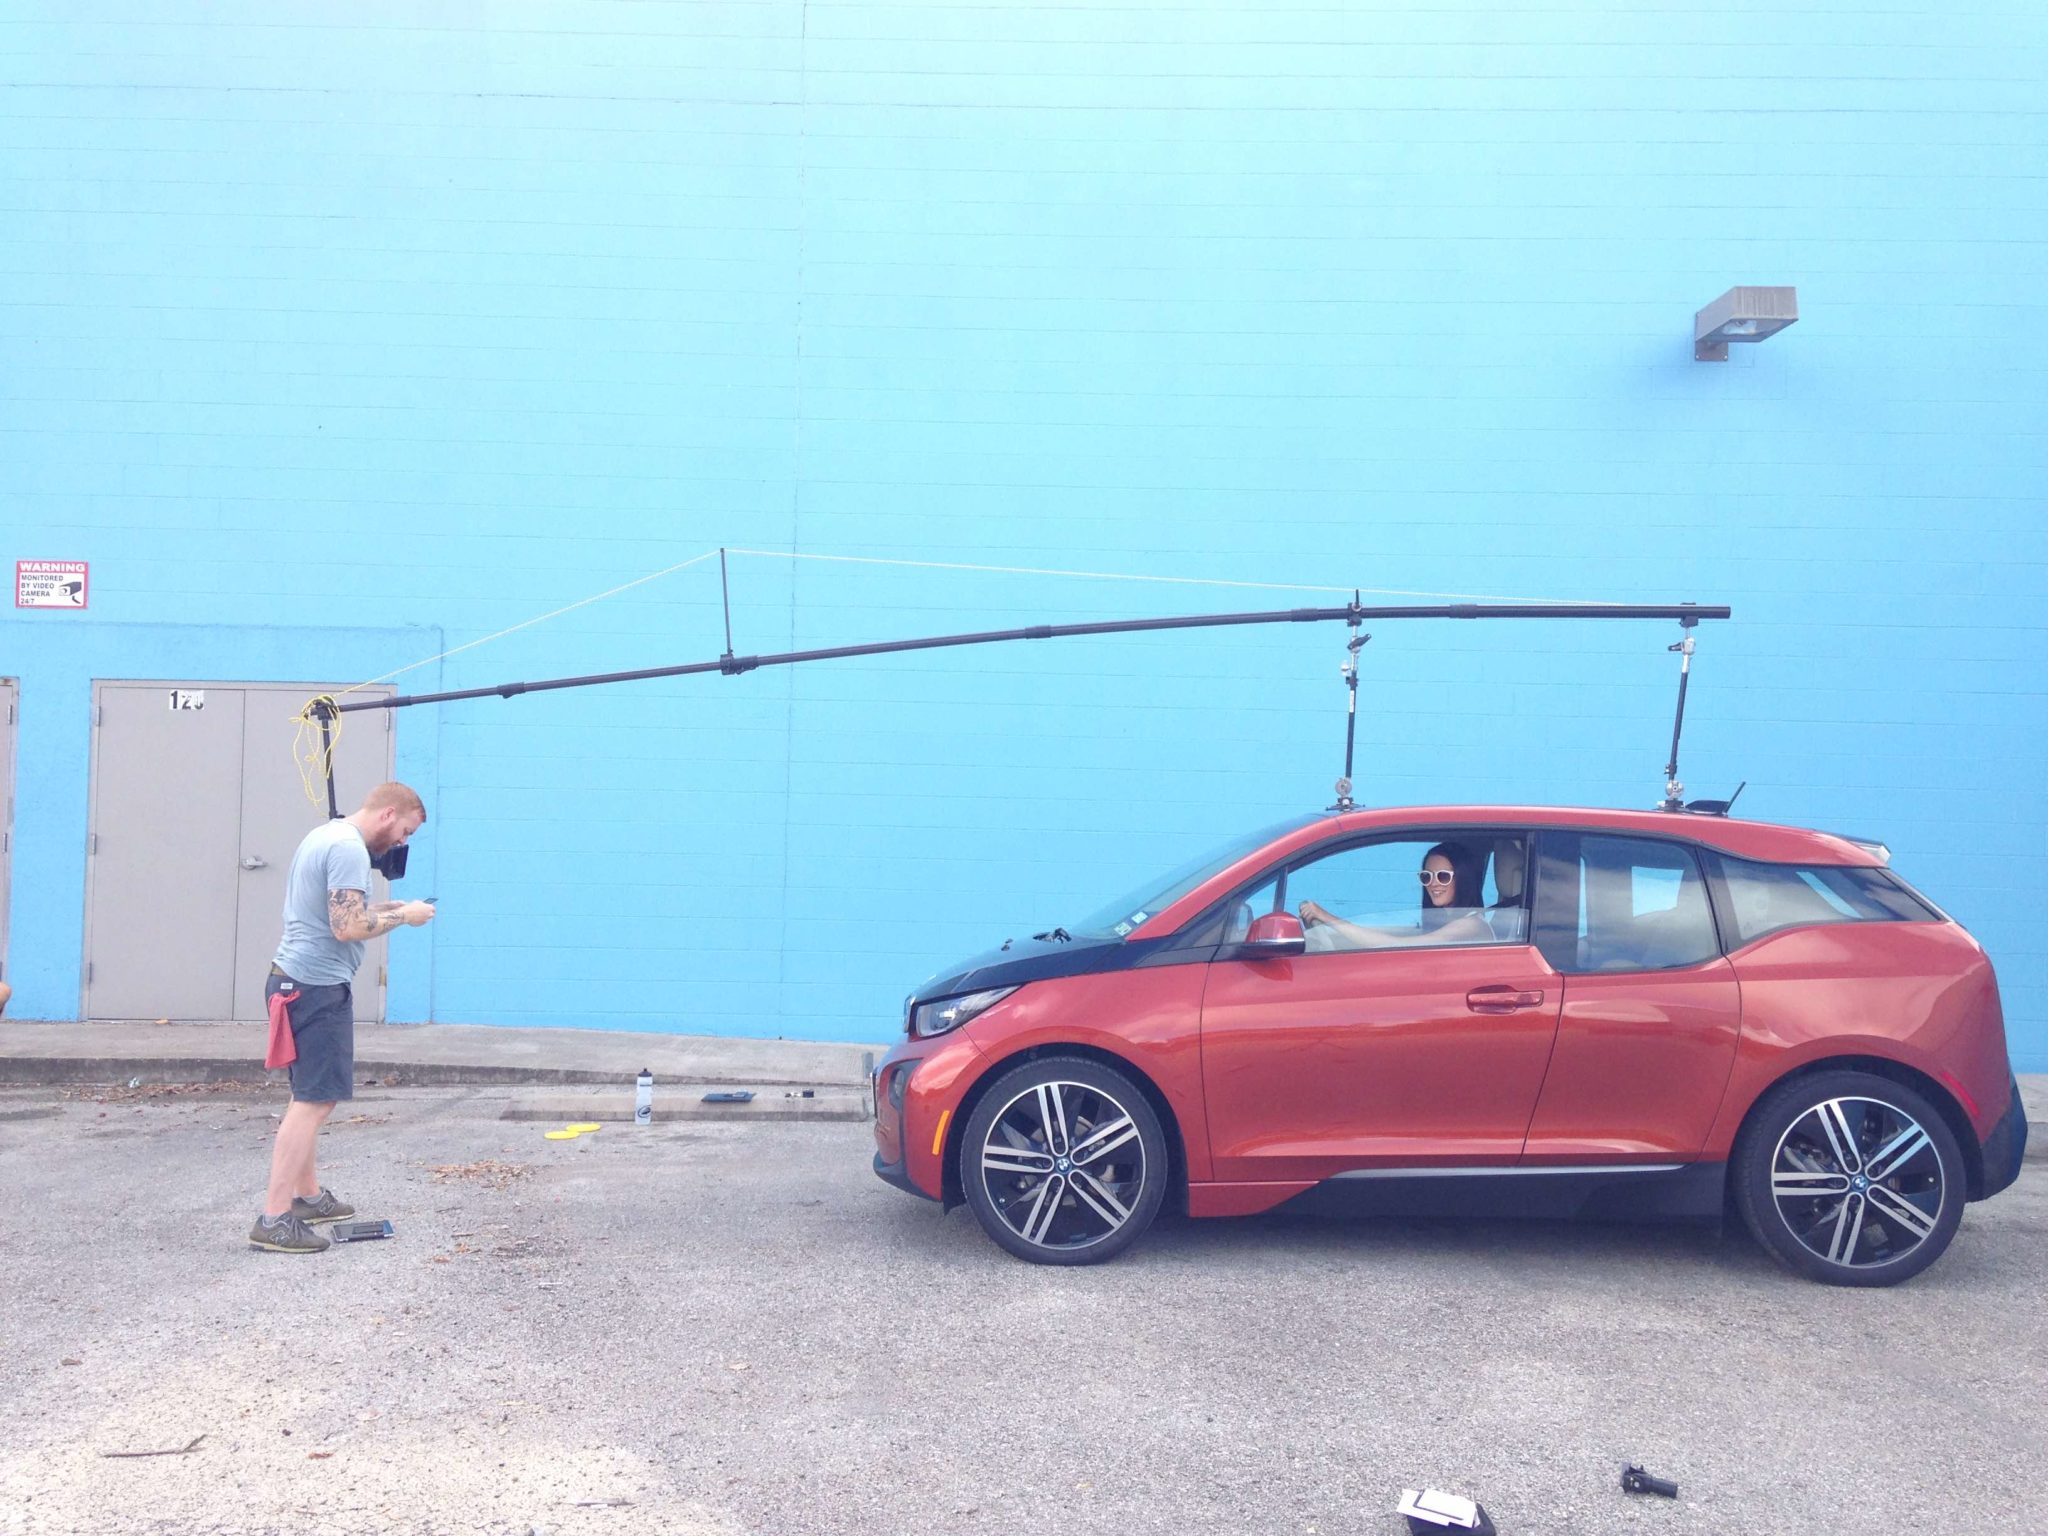 DTKAustin shares a recent photoshoot with Cody Hamilton and an electric BMW i3. Click for more photos and info.